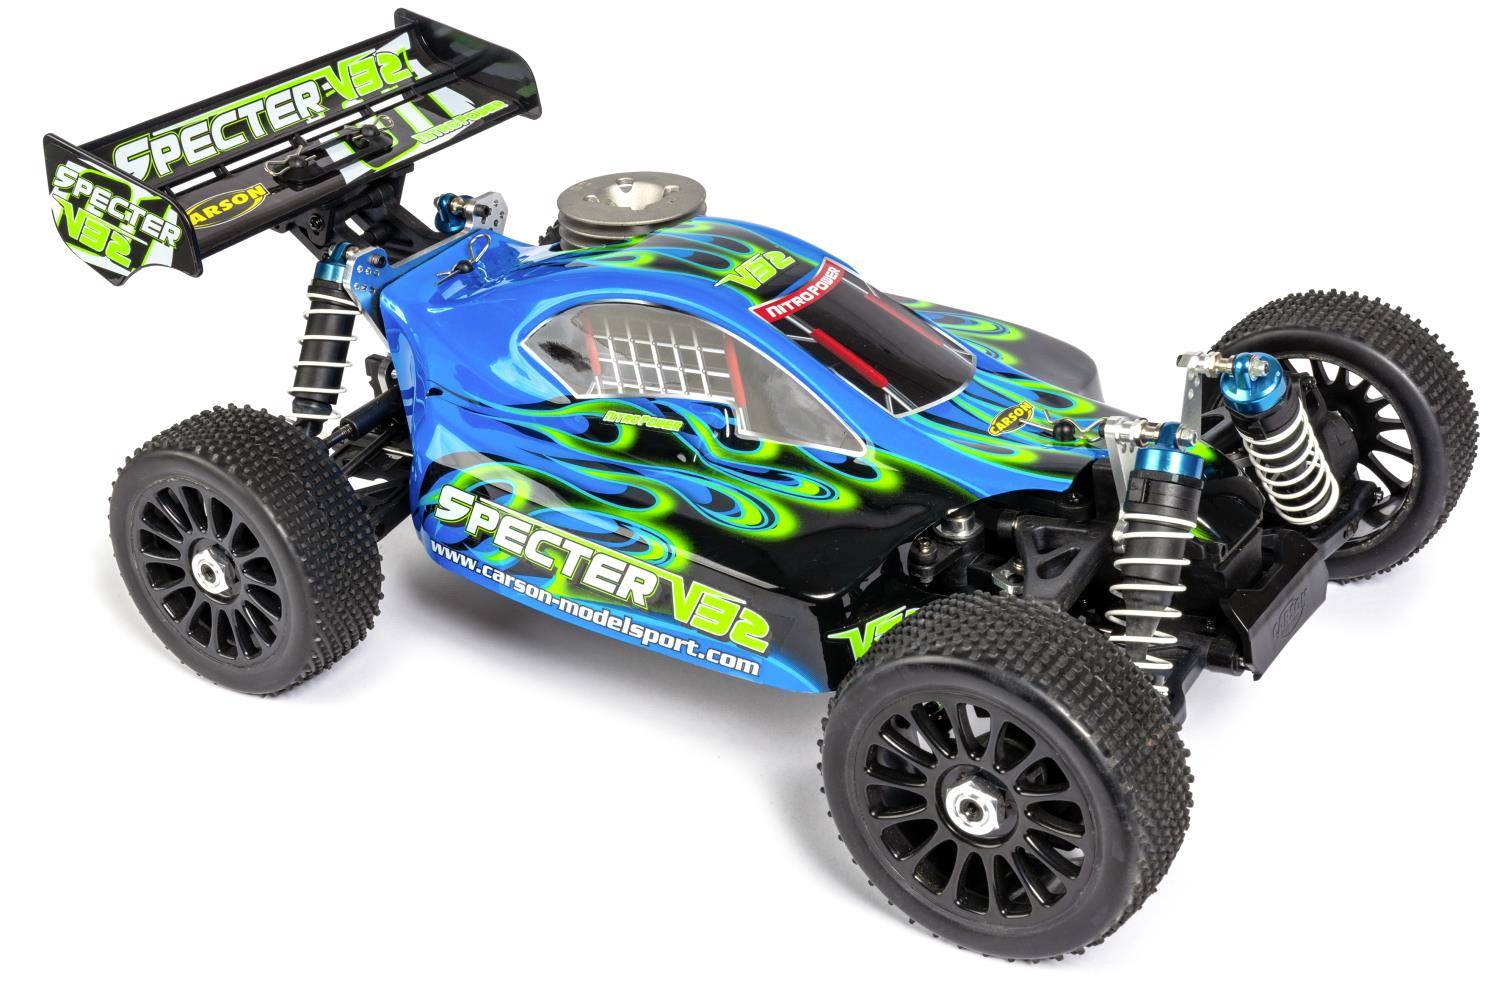 Carson 1:8 CY Specter 3.0 V32 2.4G RTR RC Nitro Buggy 4WD Offroad 500204034, Verbrennerautos offroad, Autos, RC Modellbau